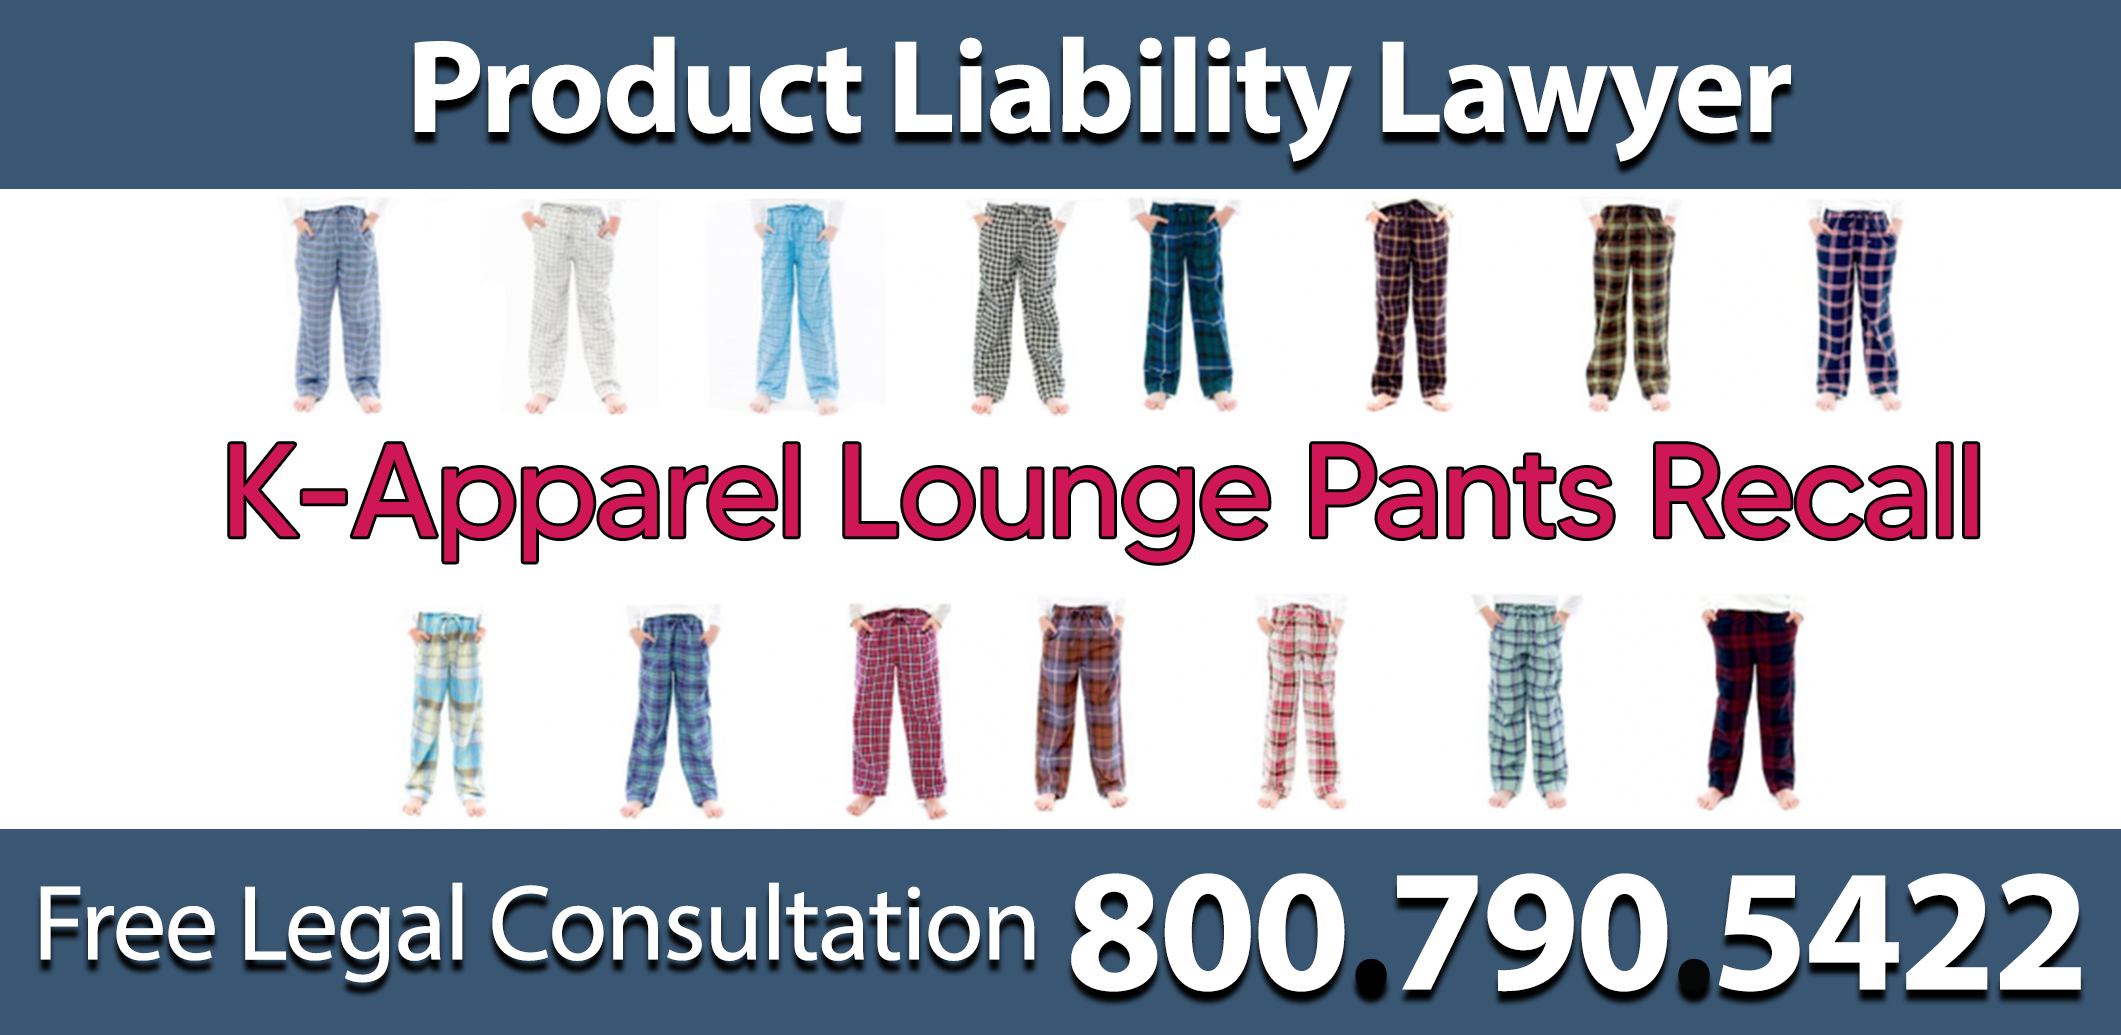 k-apparel childrens lounge pants recall defective design flaw fire hazard burn compensation product liability lawyer